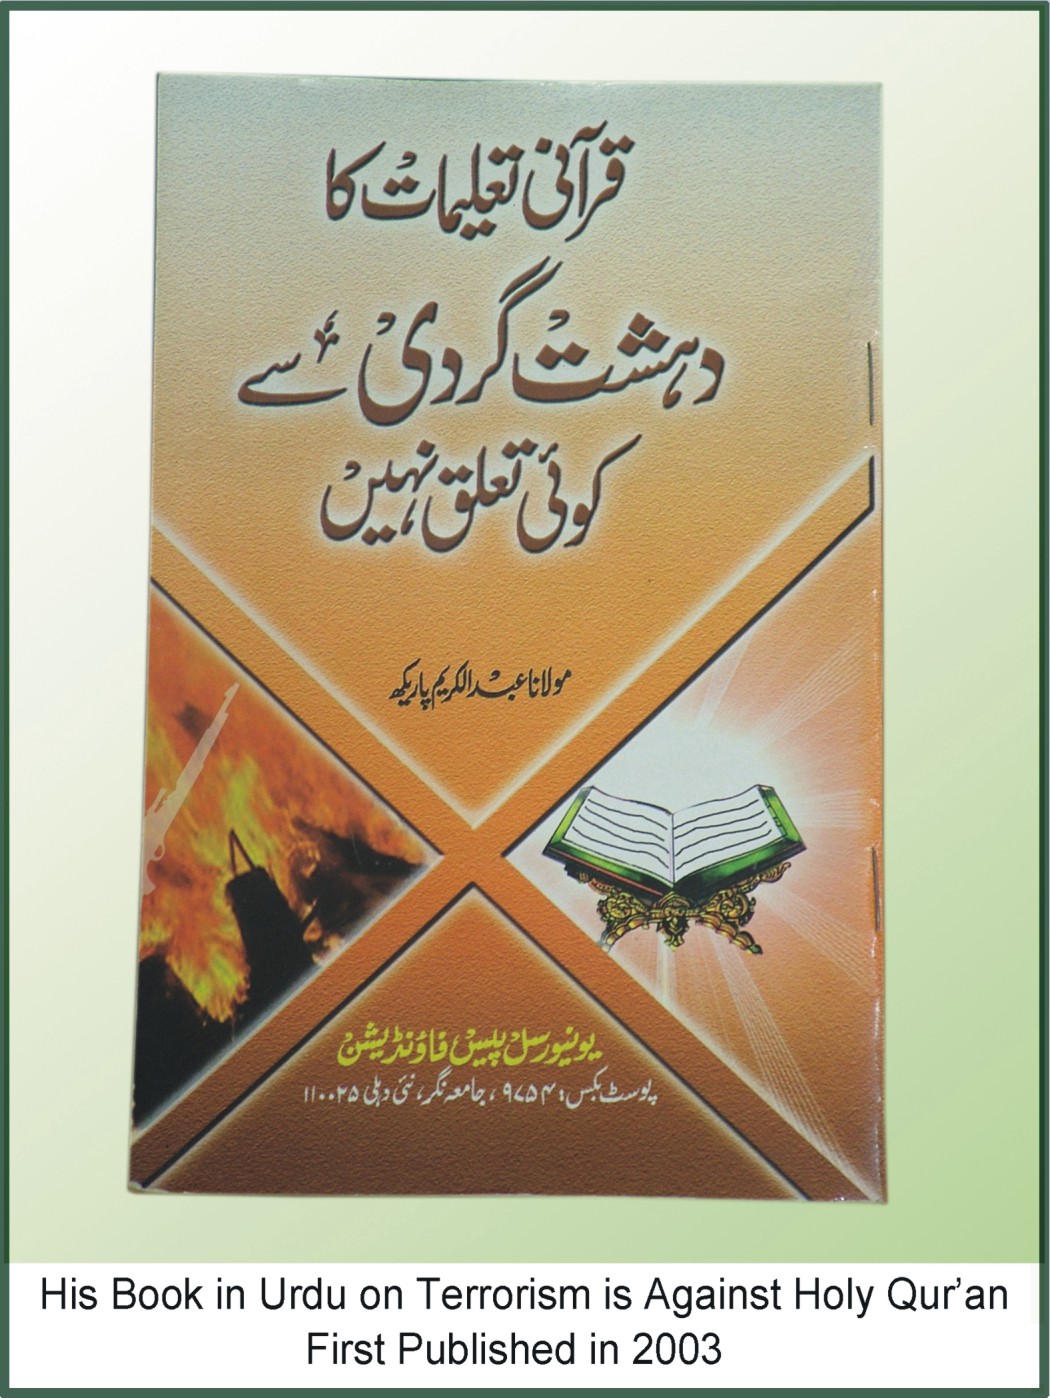 Terrorism is Against The Holy Qur'an (Urdu) First Published in 2003